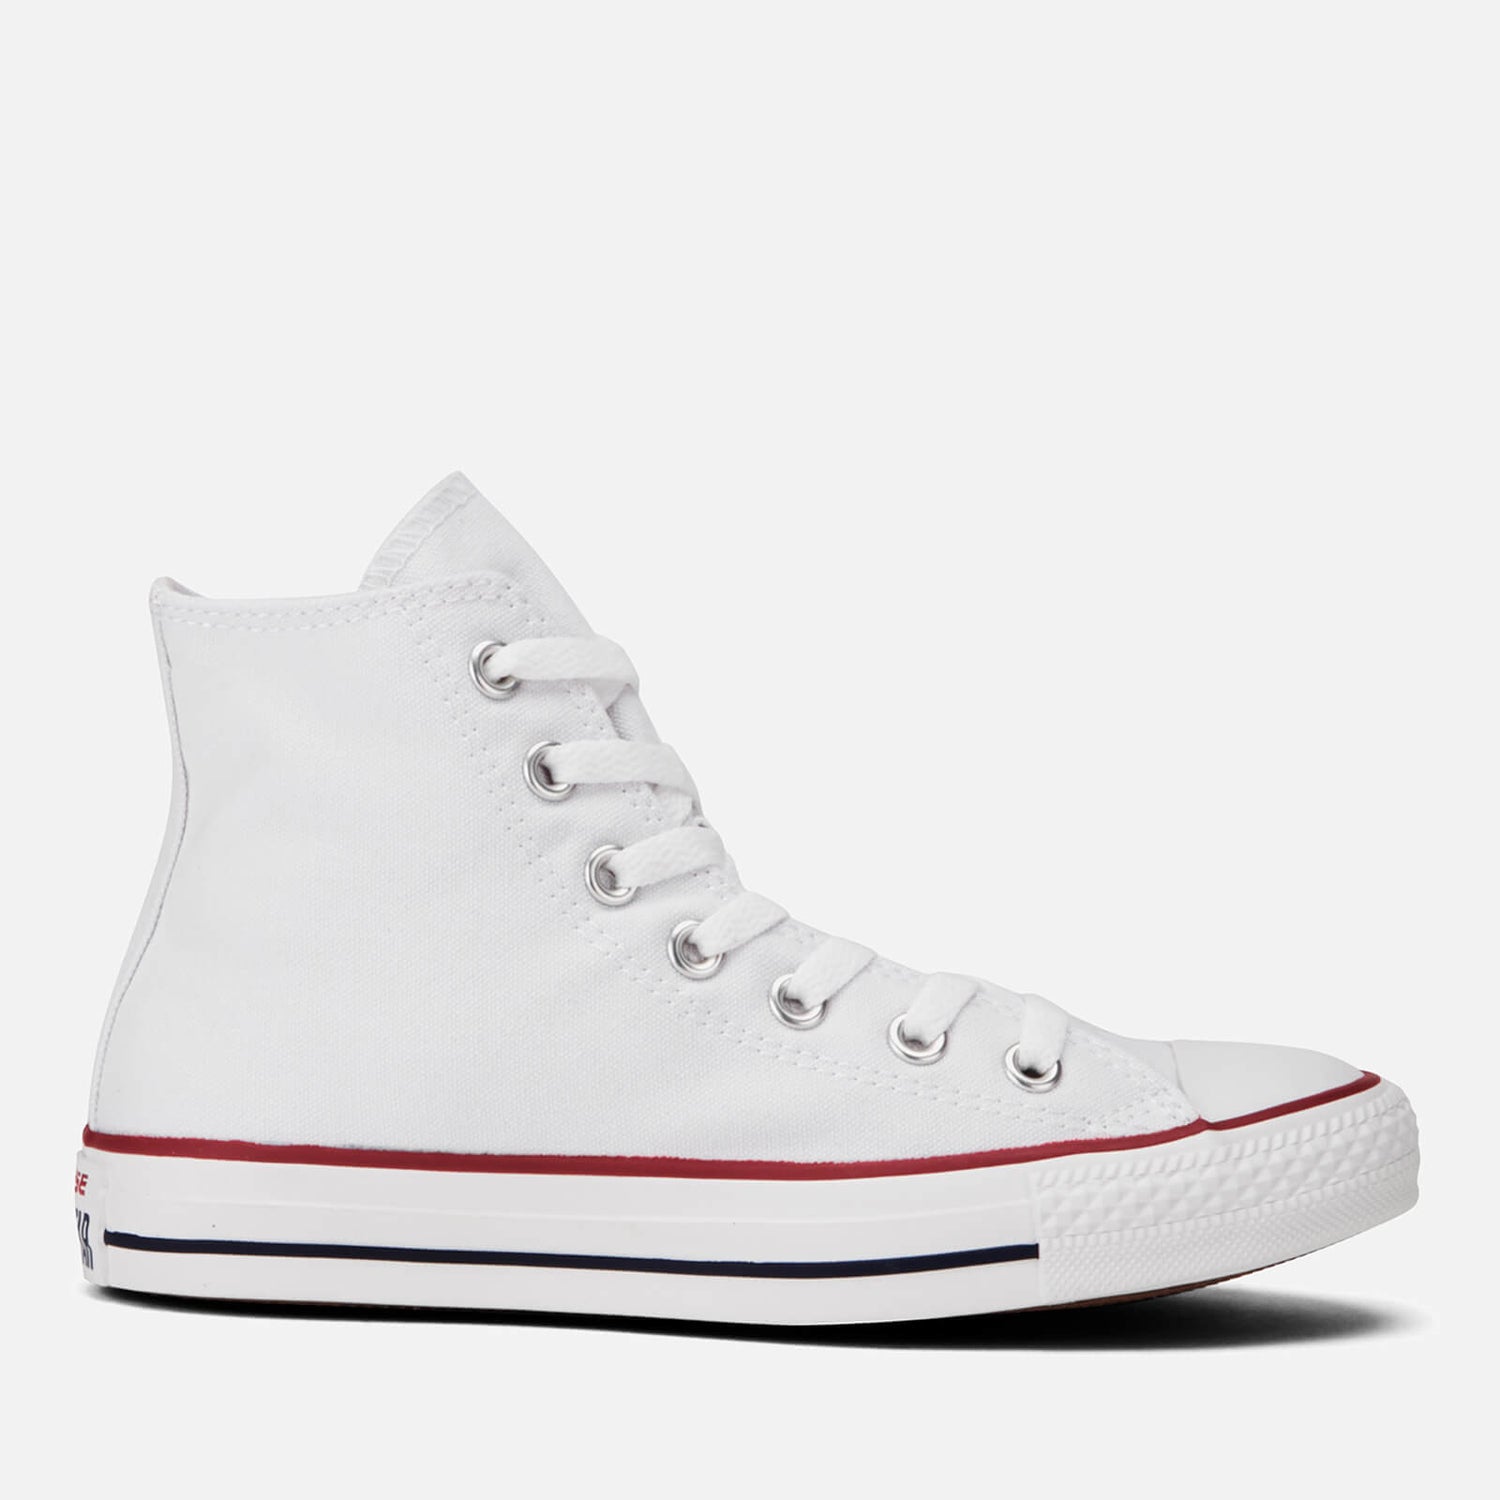 Converse Chuck Taylor All Star Hi-Top Trainers - Optical White - UK 3